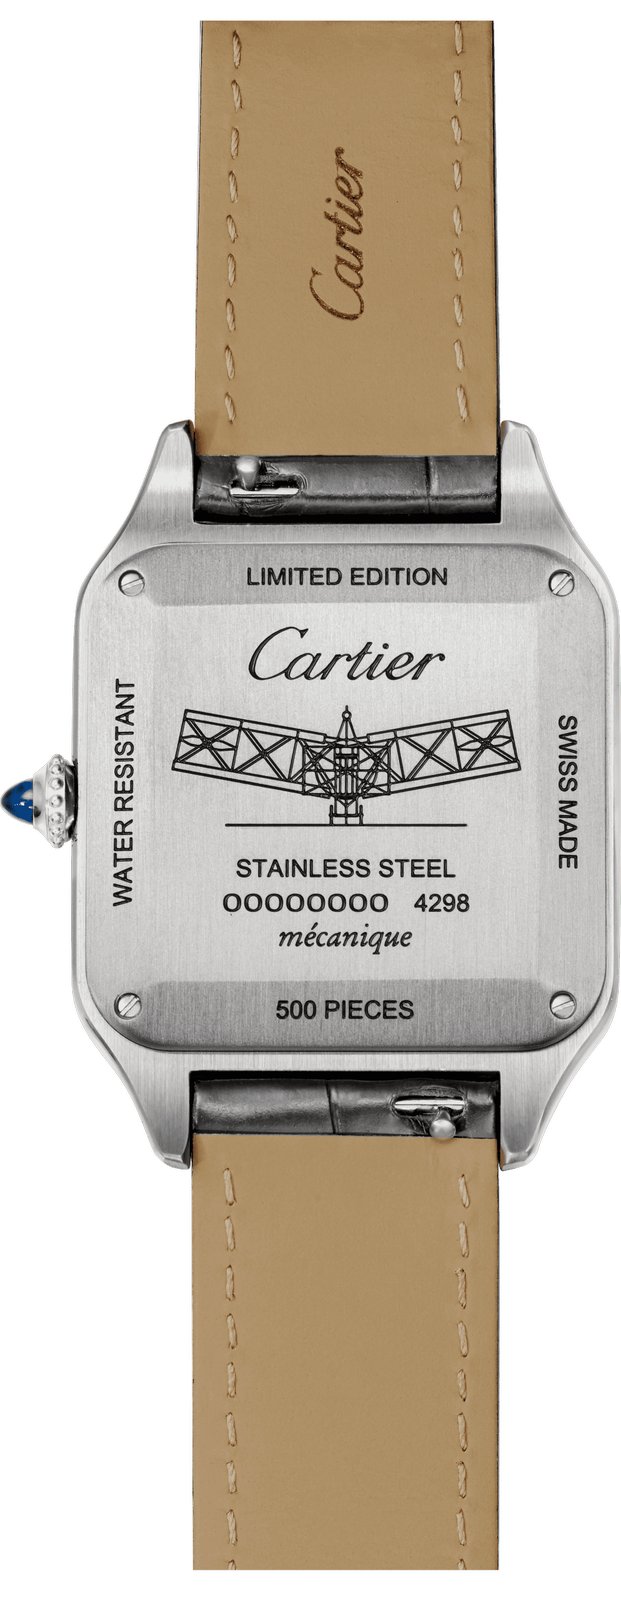 cartier mens watch limited edition